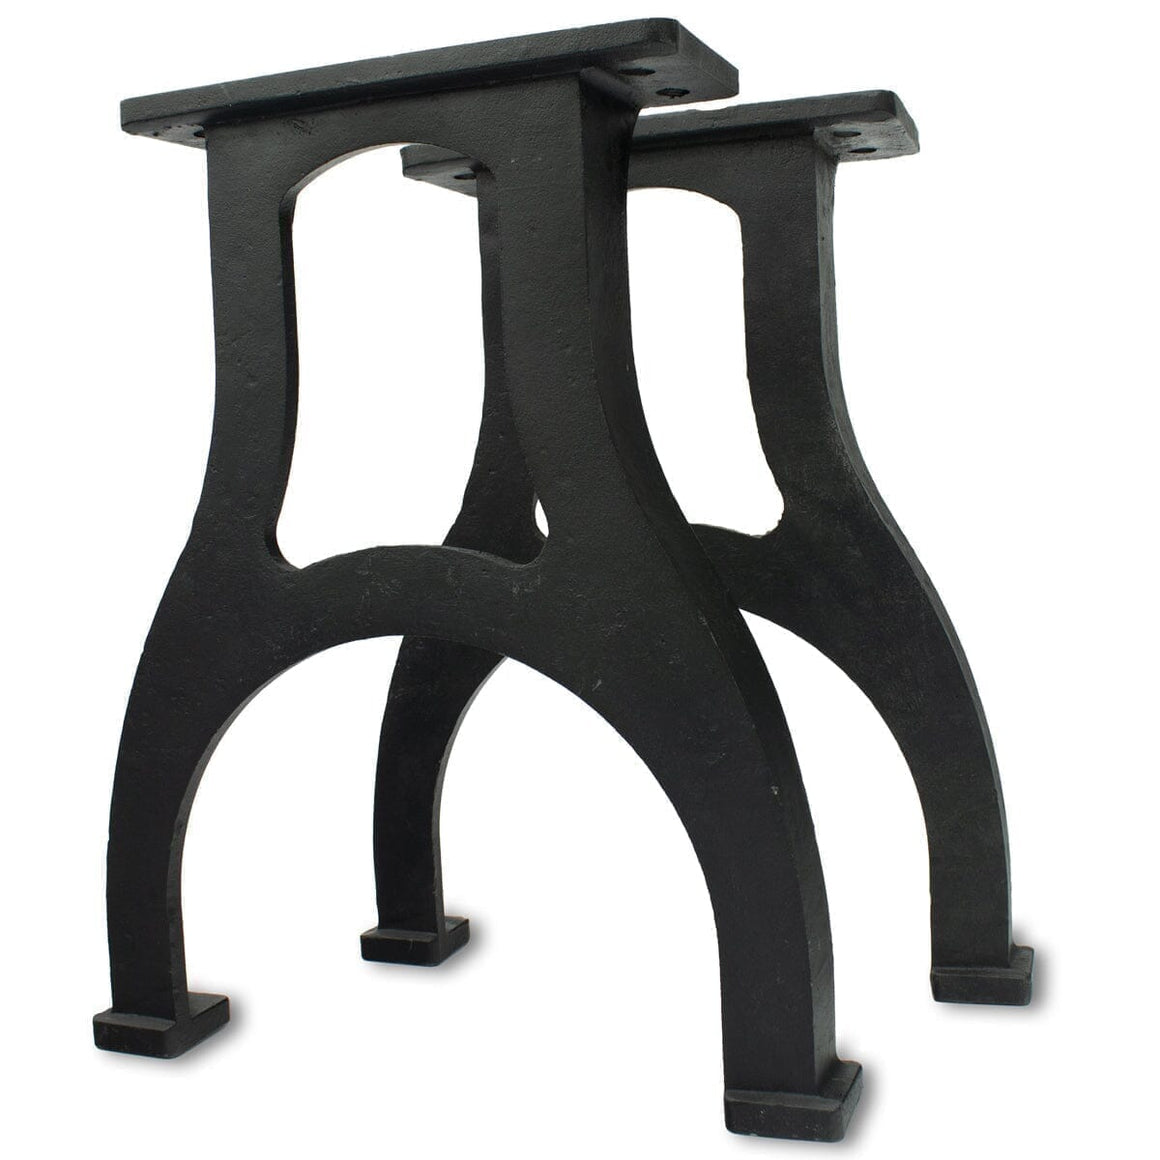 Industrial Cast Iron Bench Table Base Legs Set - Black -17 Inch Tall - DIY - Rustic Deco Incorporated